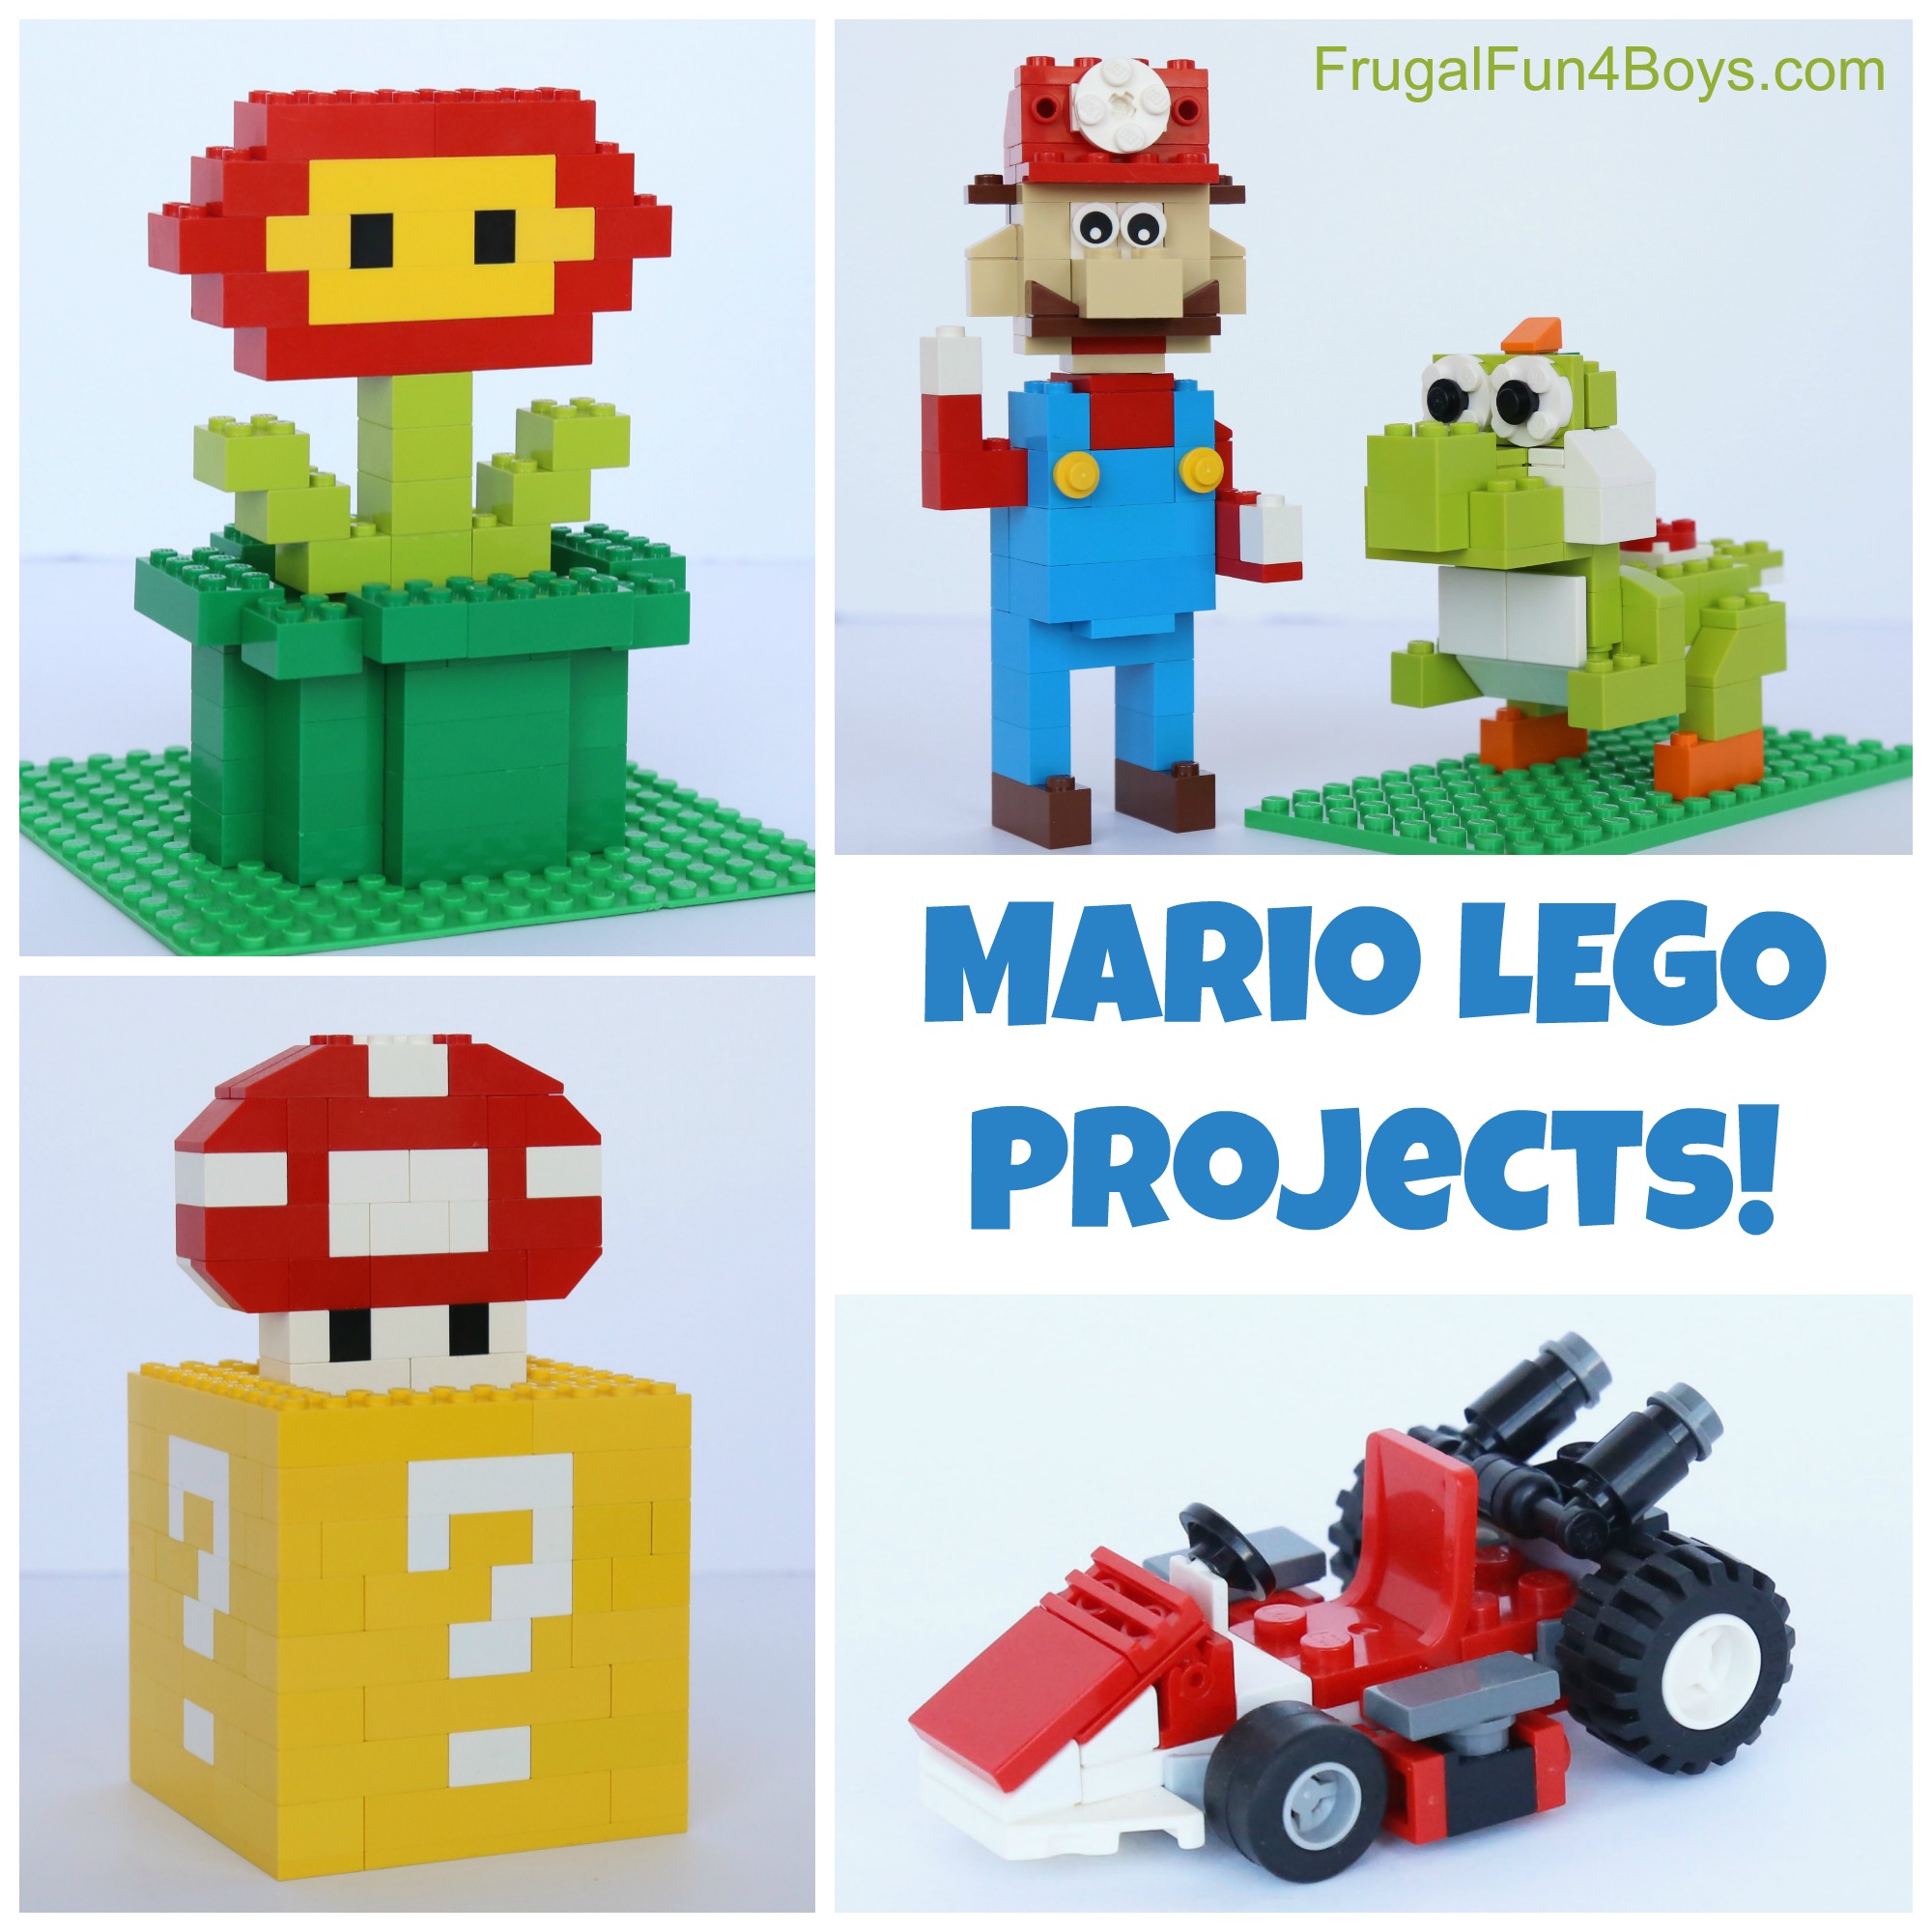 Mario LEGO Projects to Build with Instructions